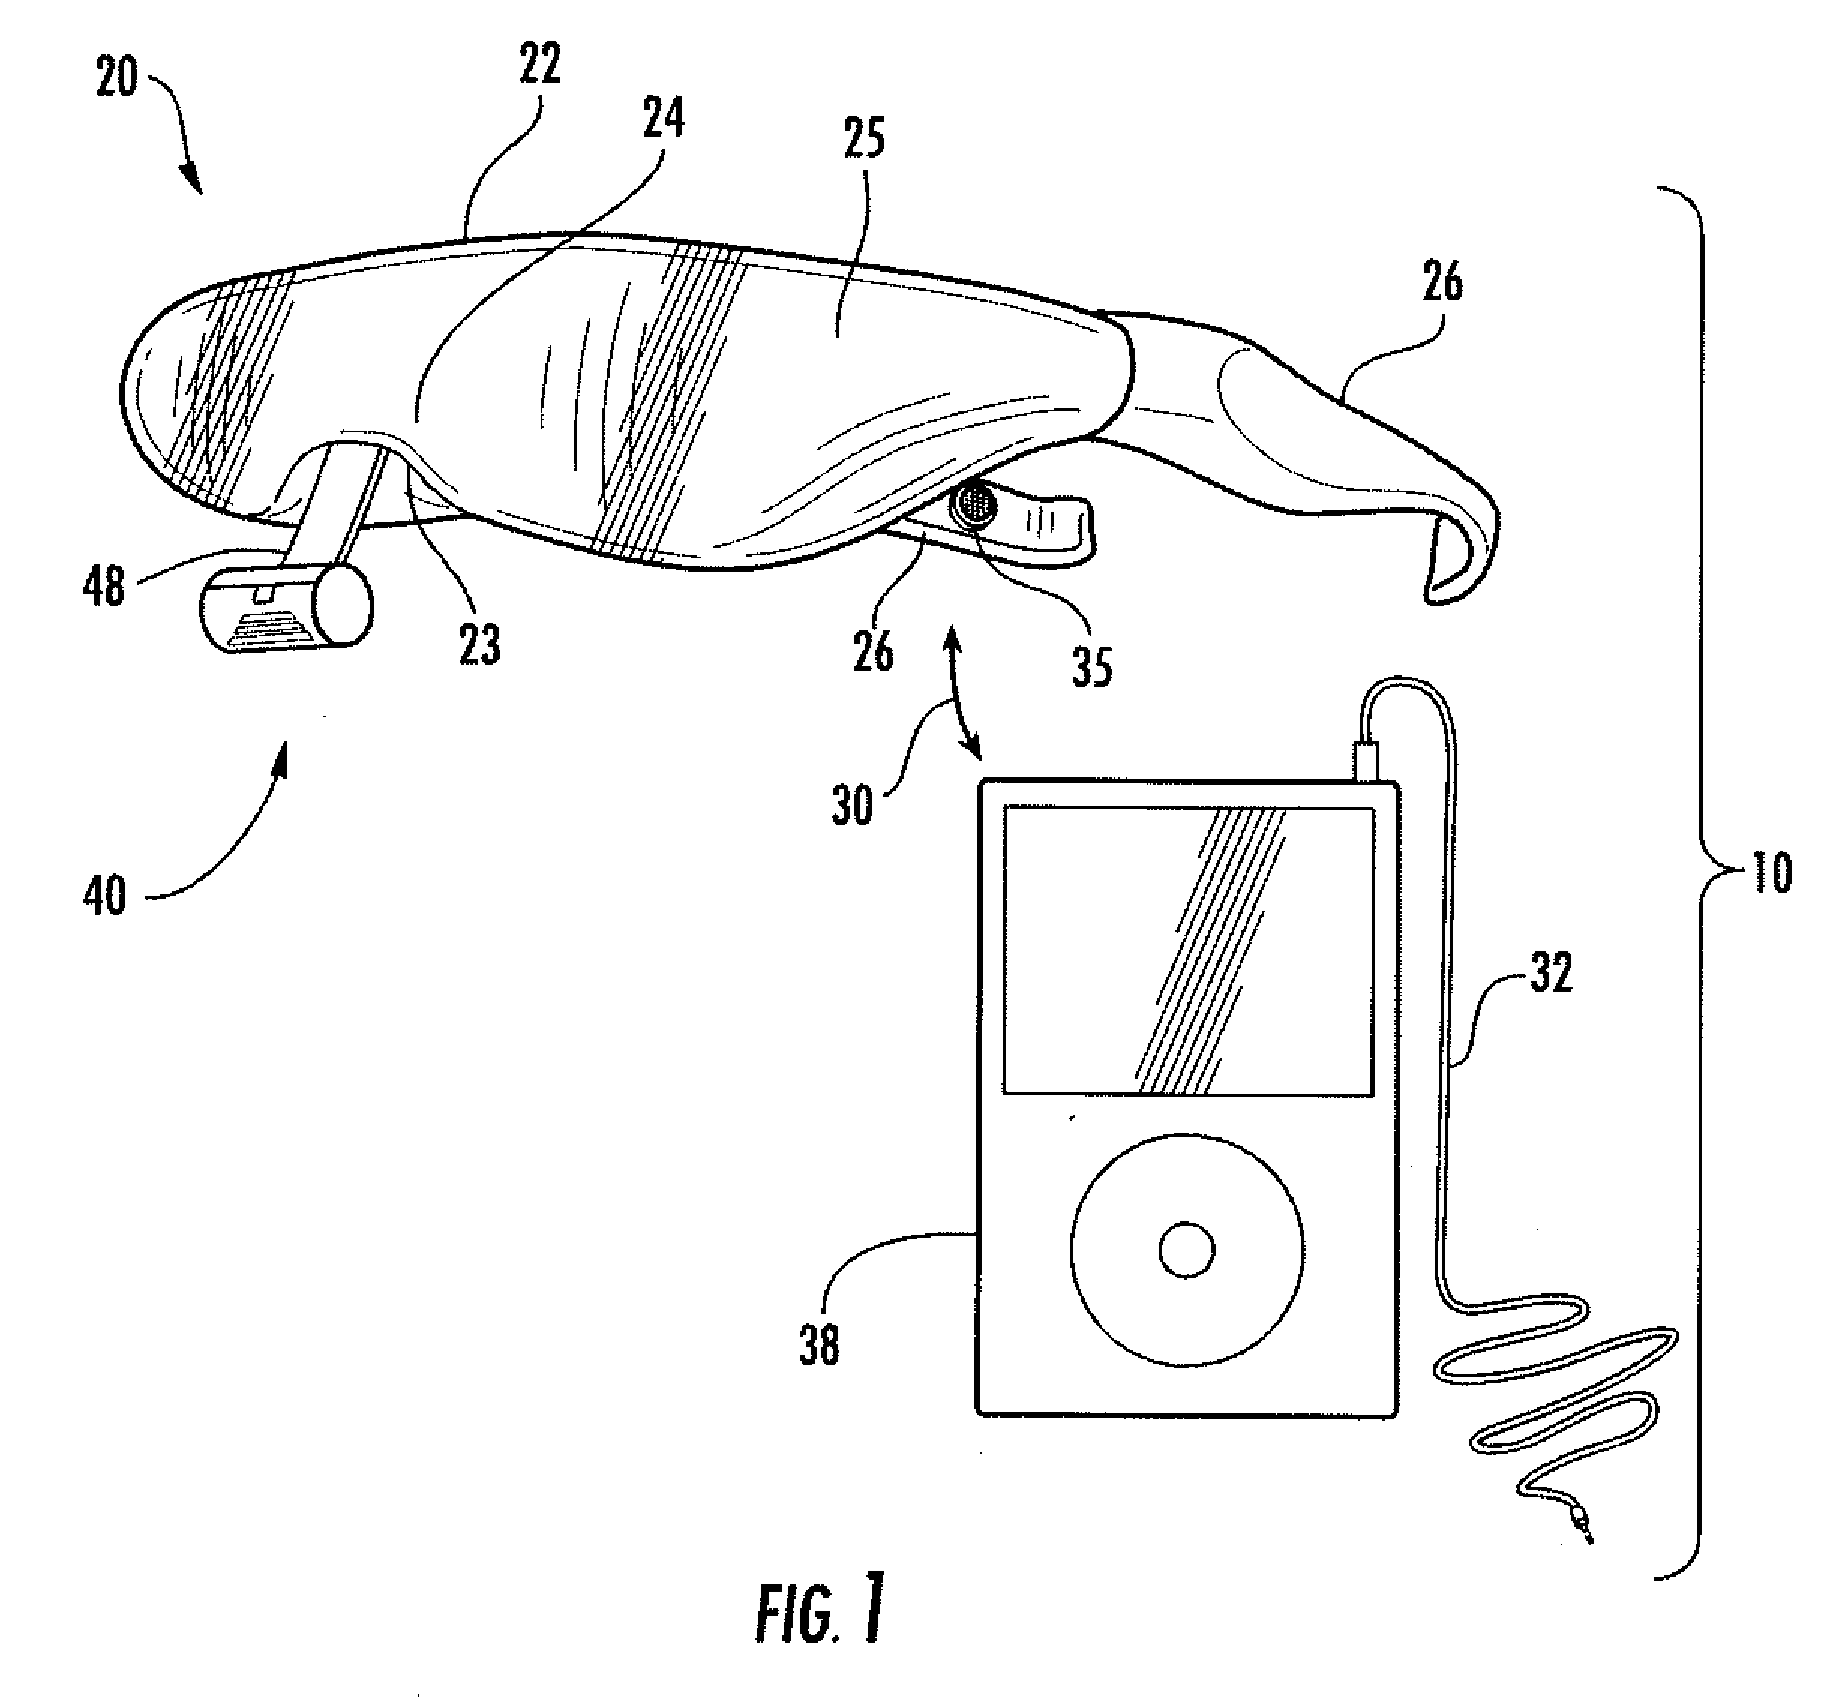 Apparatus and method of relaxation therapy